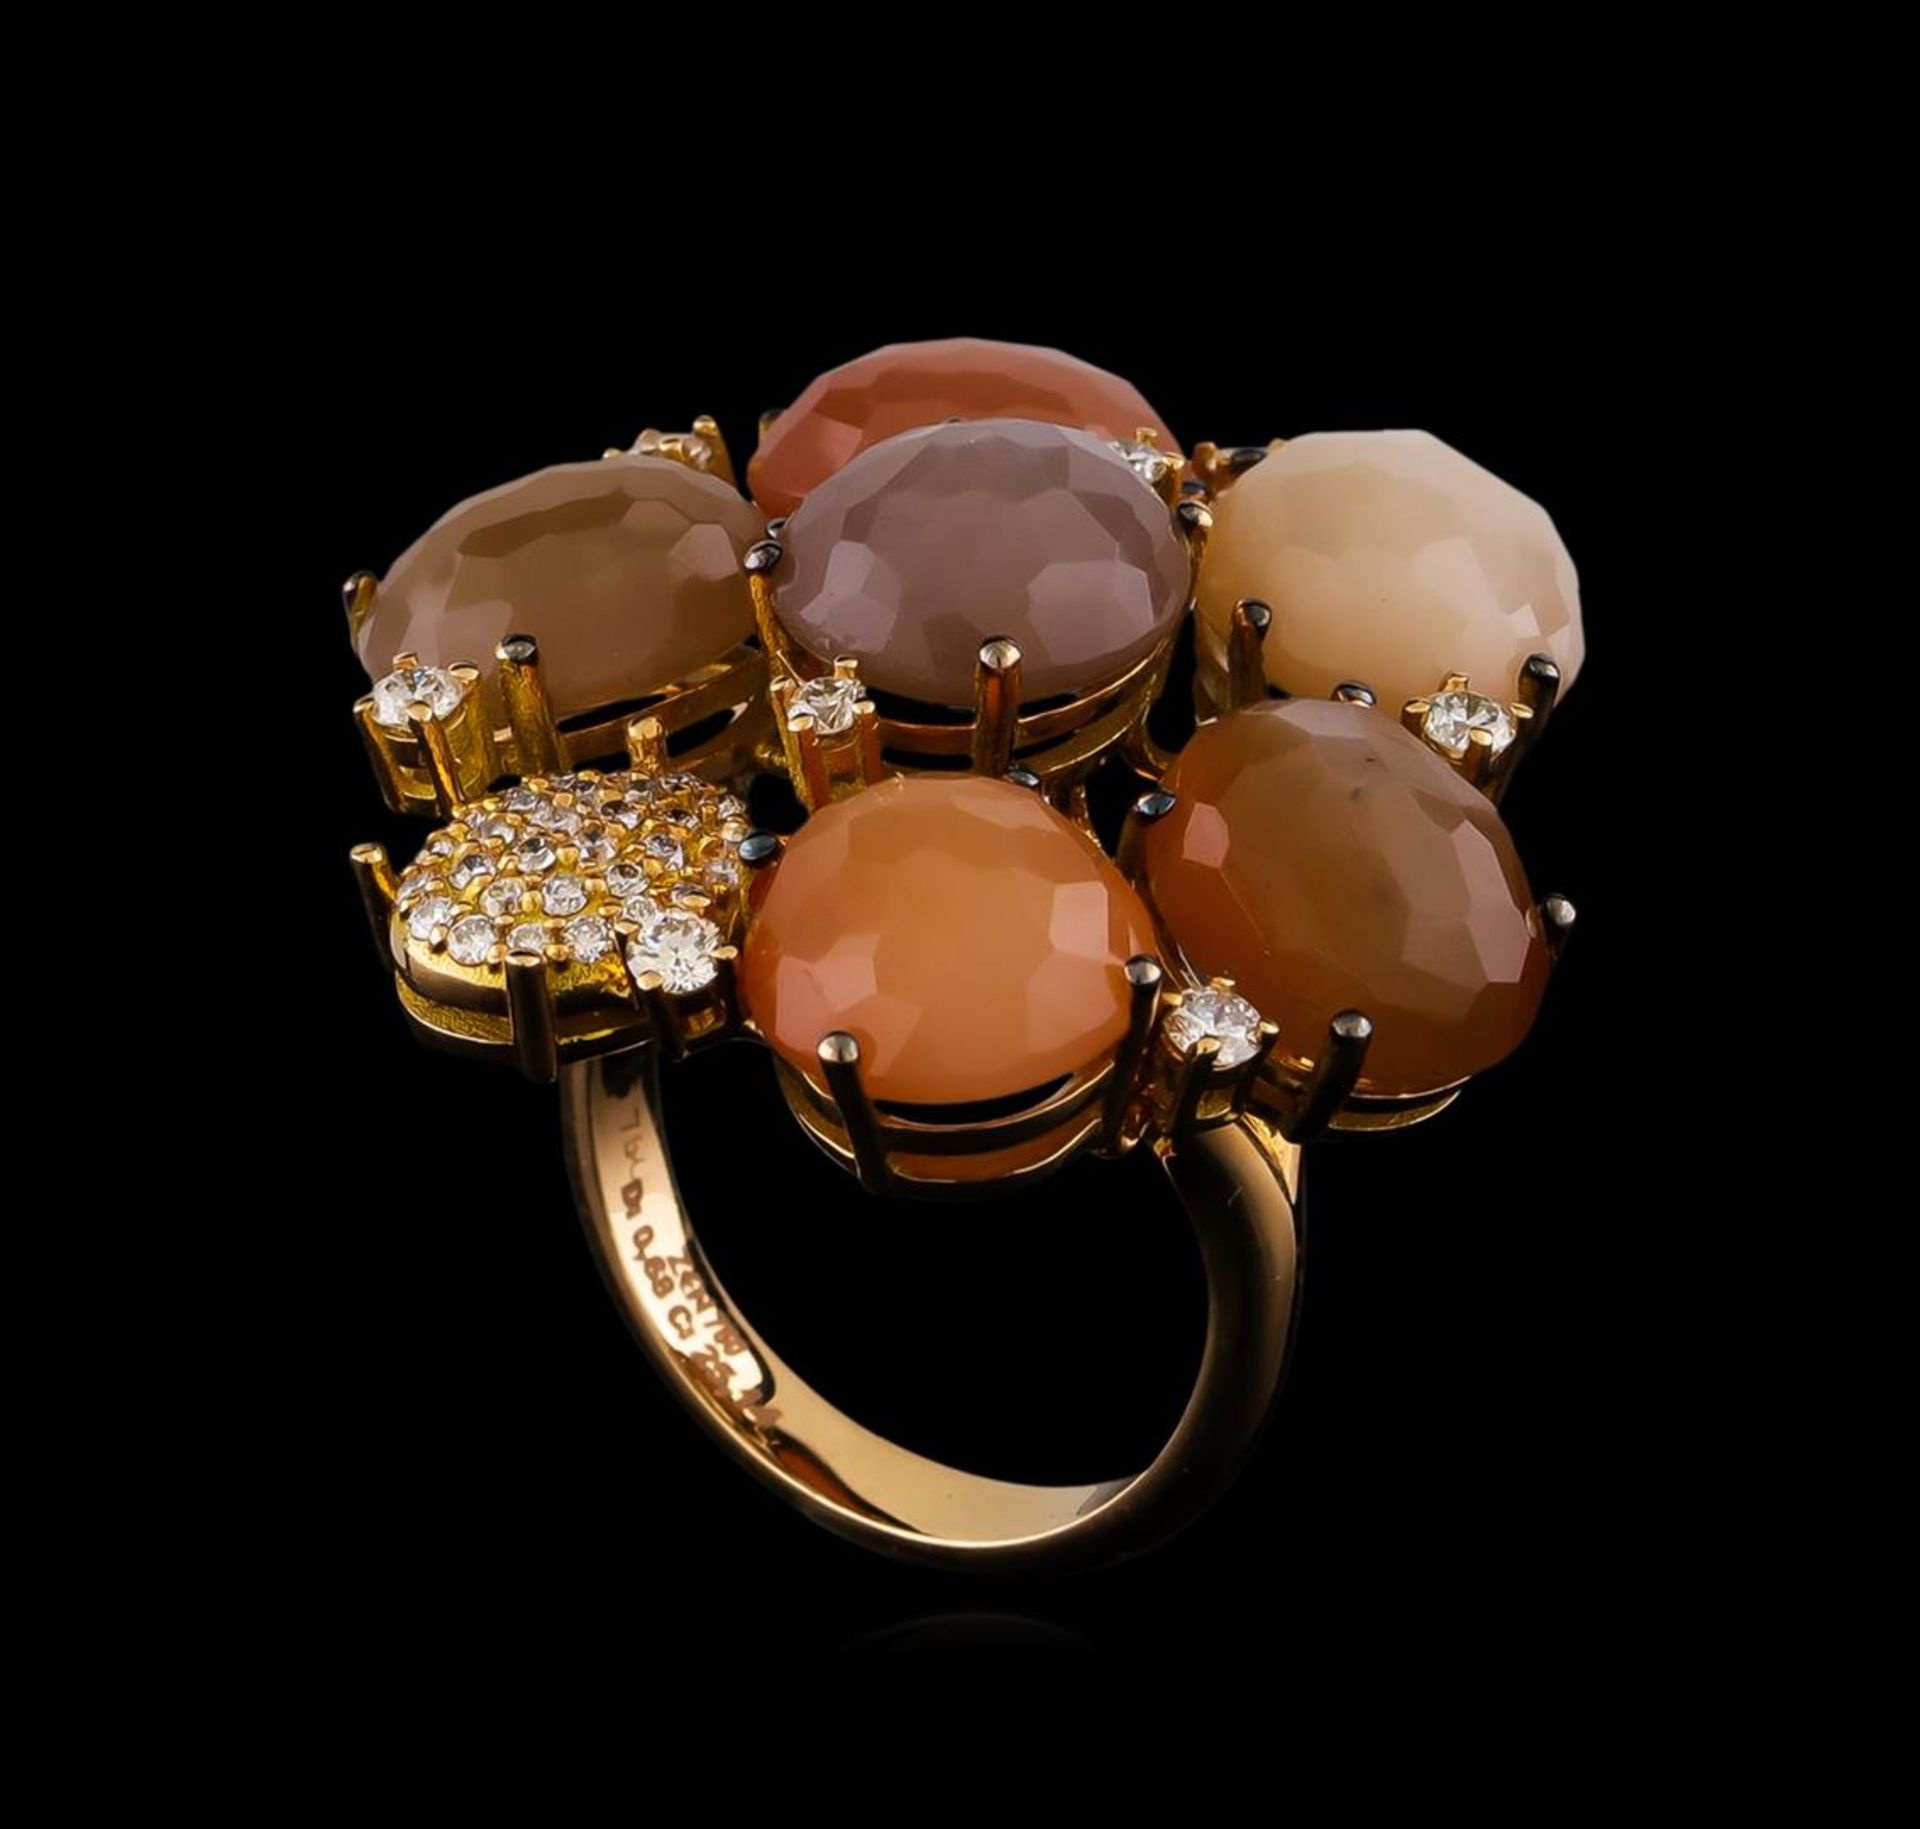 25.14 ctw Sunstone and Diamond Ring - 18KT Yellow Gold - Image 4 of 5